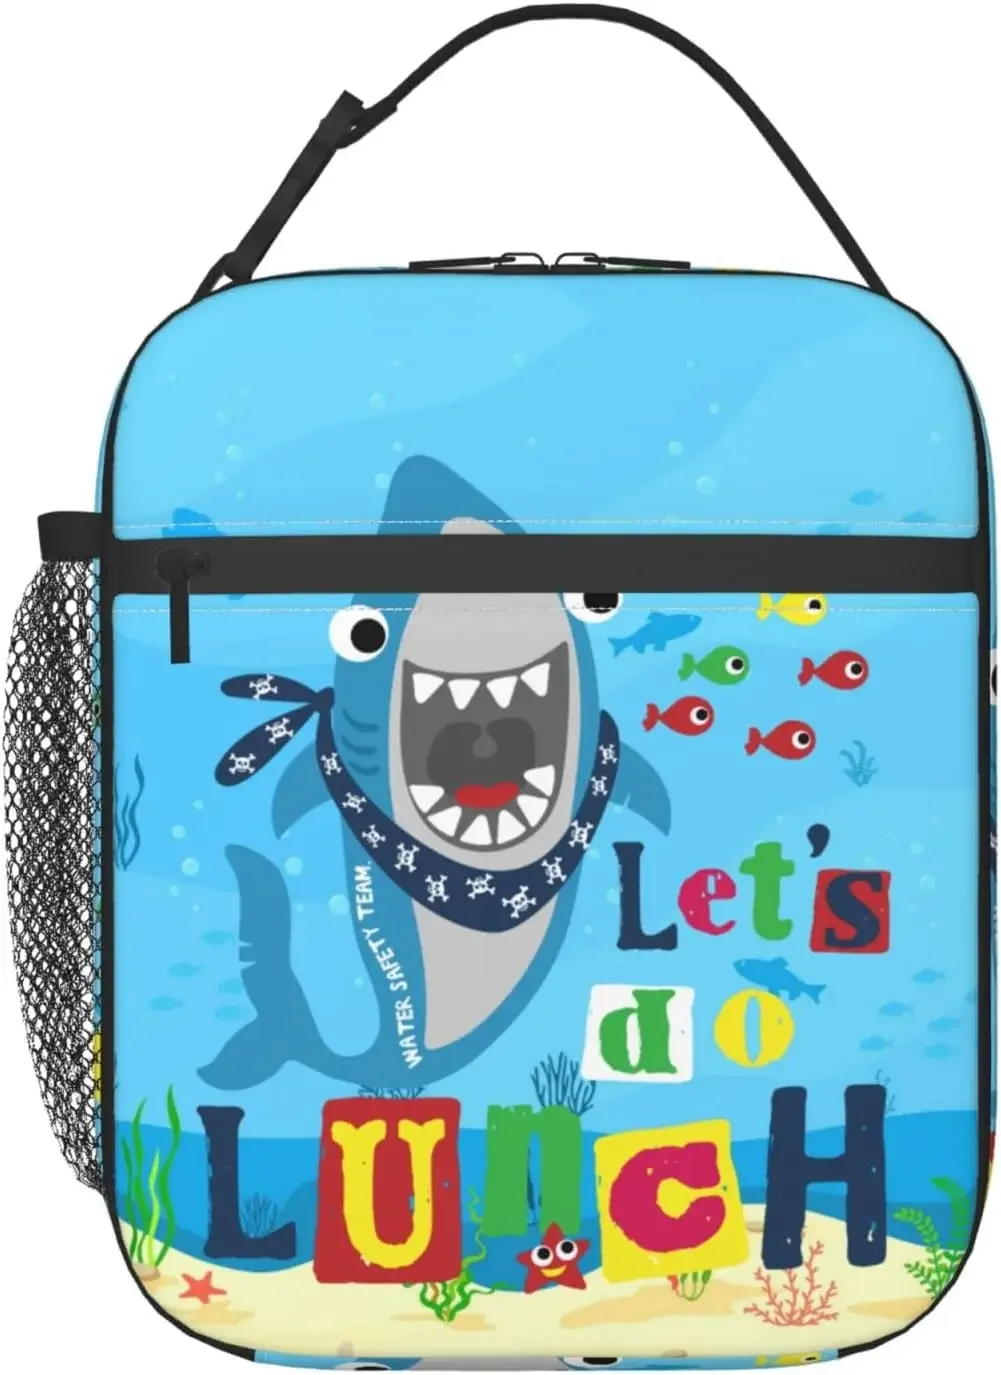 

Shark Undersea Lunch Bag, Insulated Reusable Soft Lunch Bag, Portable Thermal Meal Cooler Totes